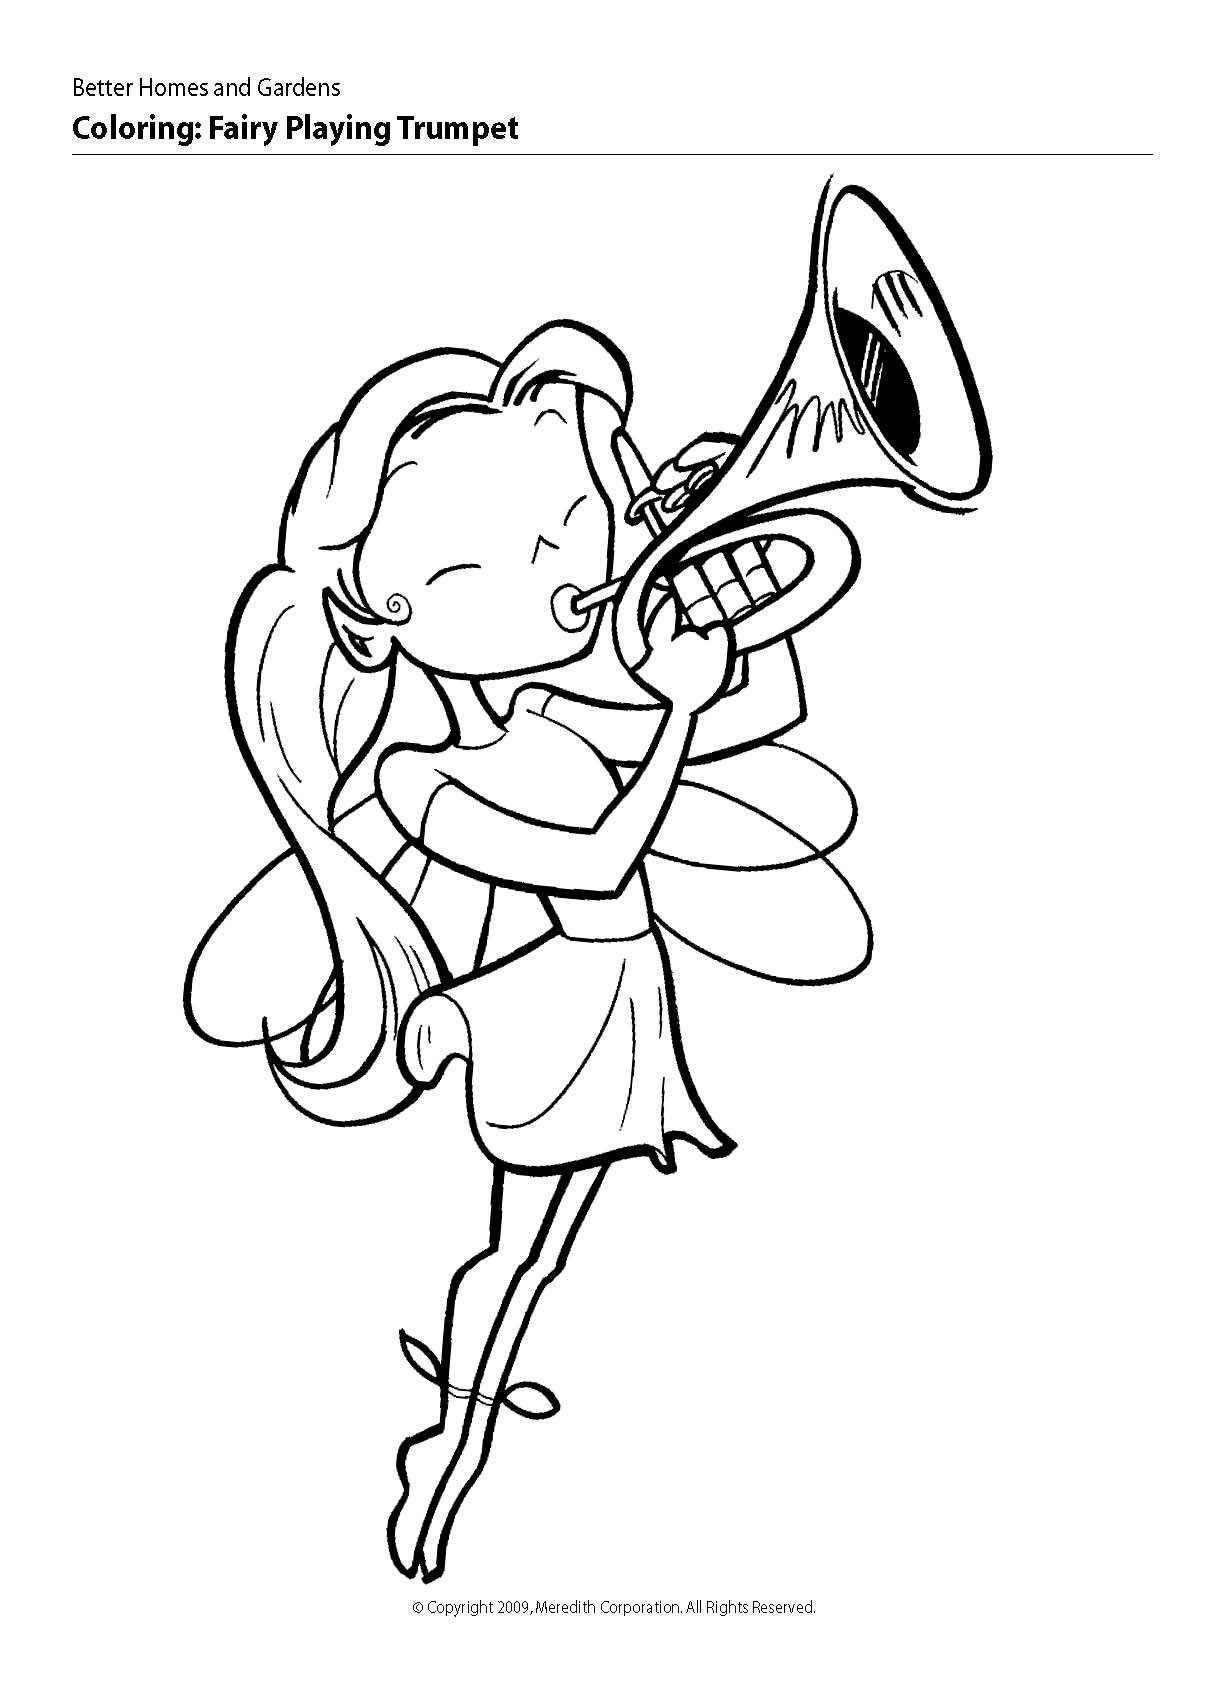 Fairy playing trumpet. | Coloring pages for kids, Coloring pages ...